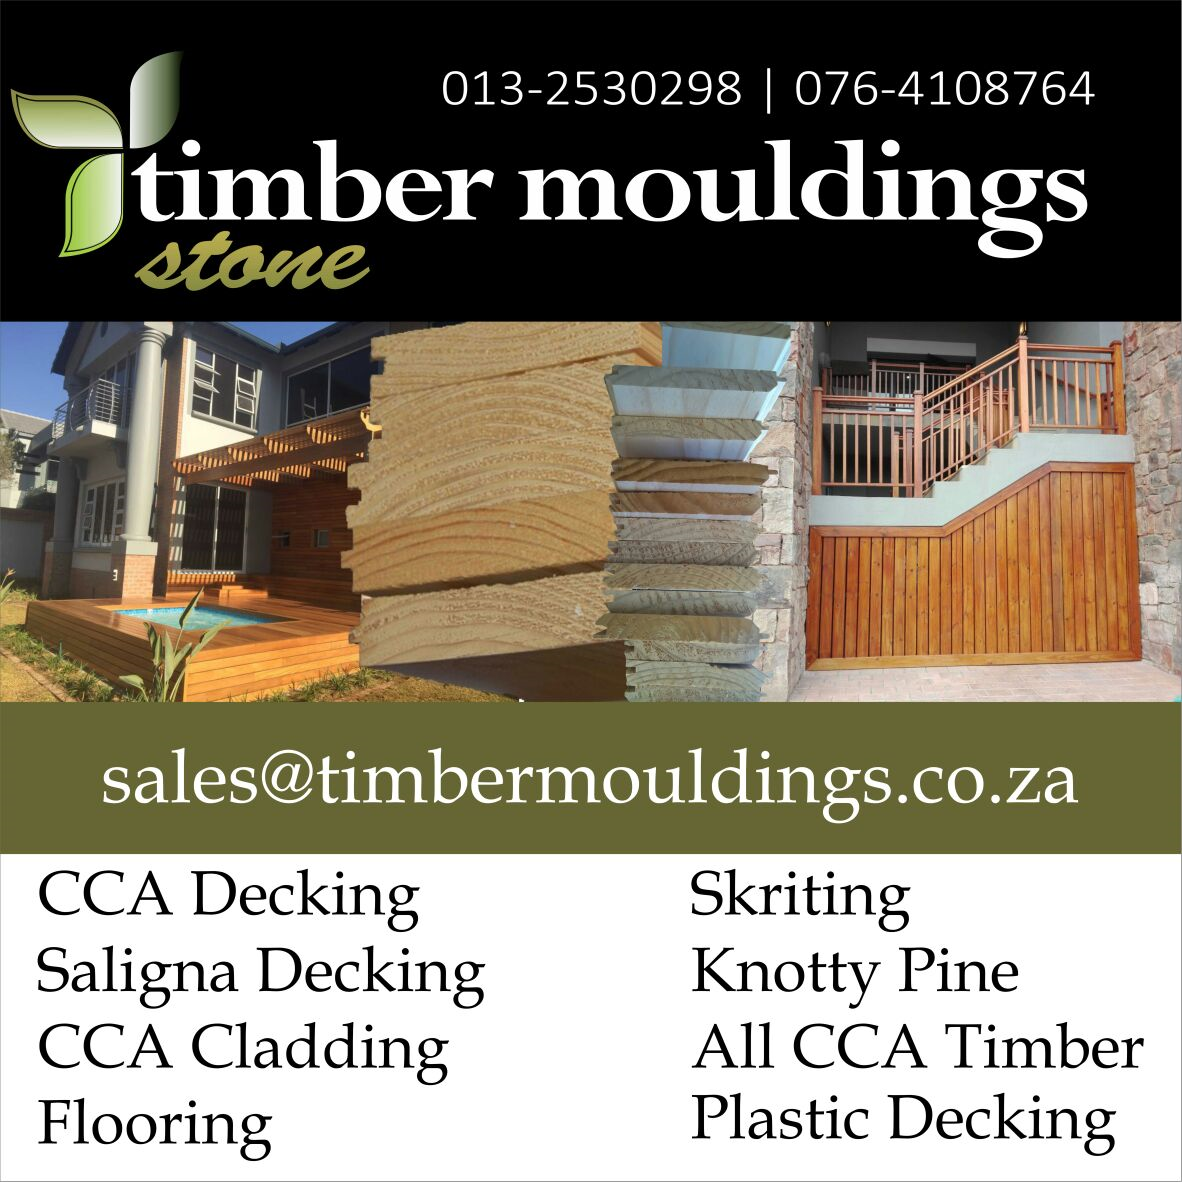 For all your Timber needs